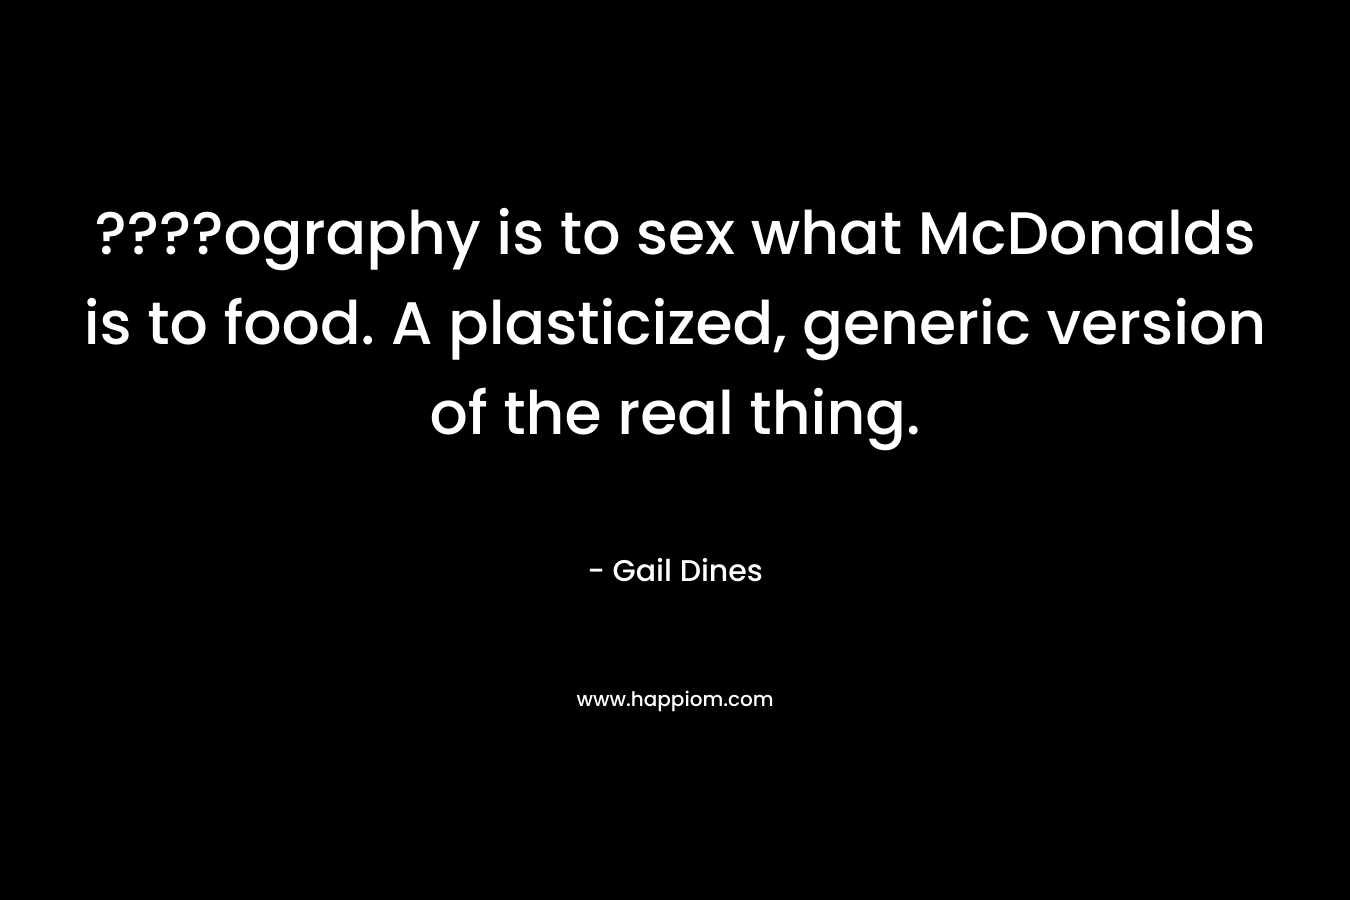 ????ography is to sex what McDonalds is to food. A plasticized, generic version of the real thing.